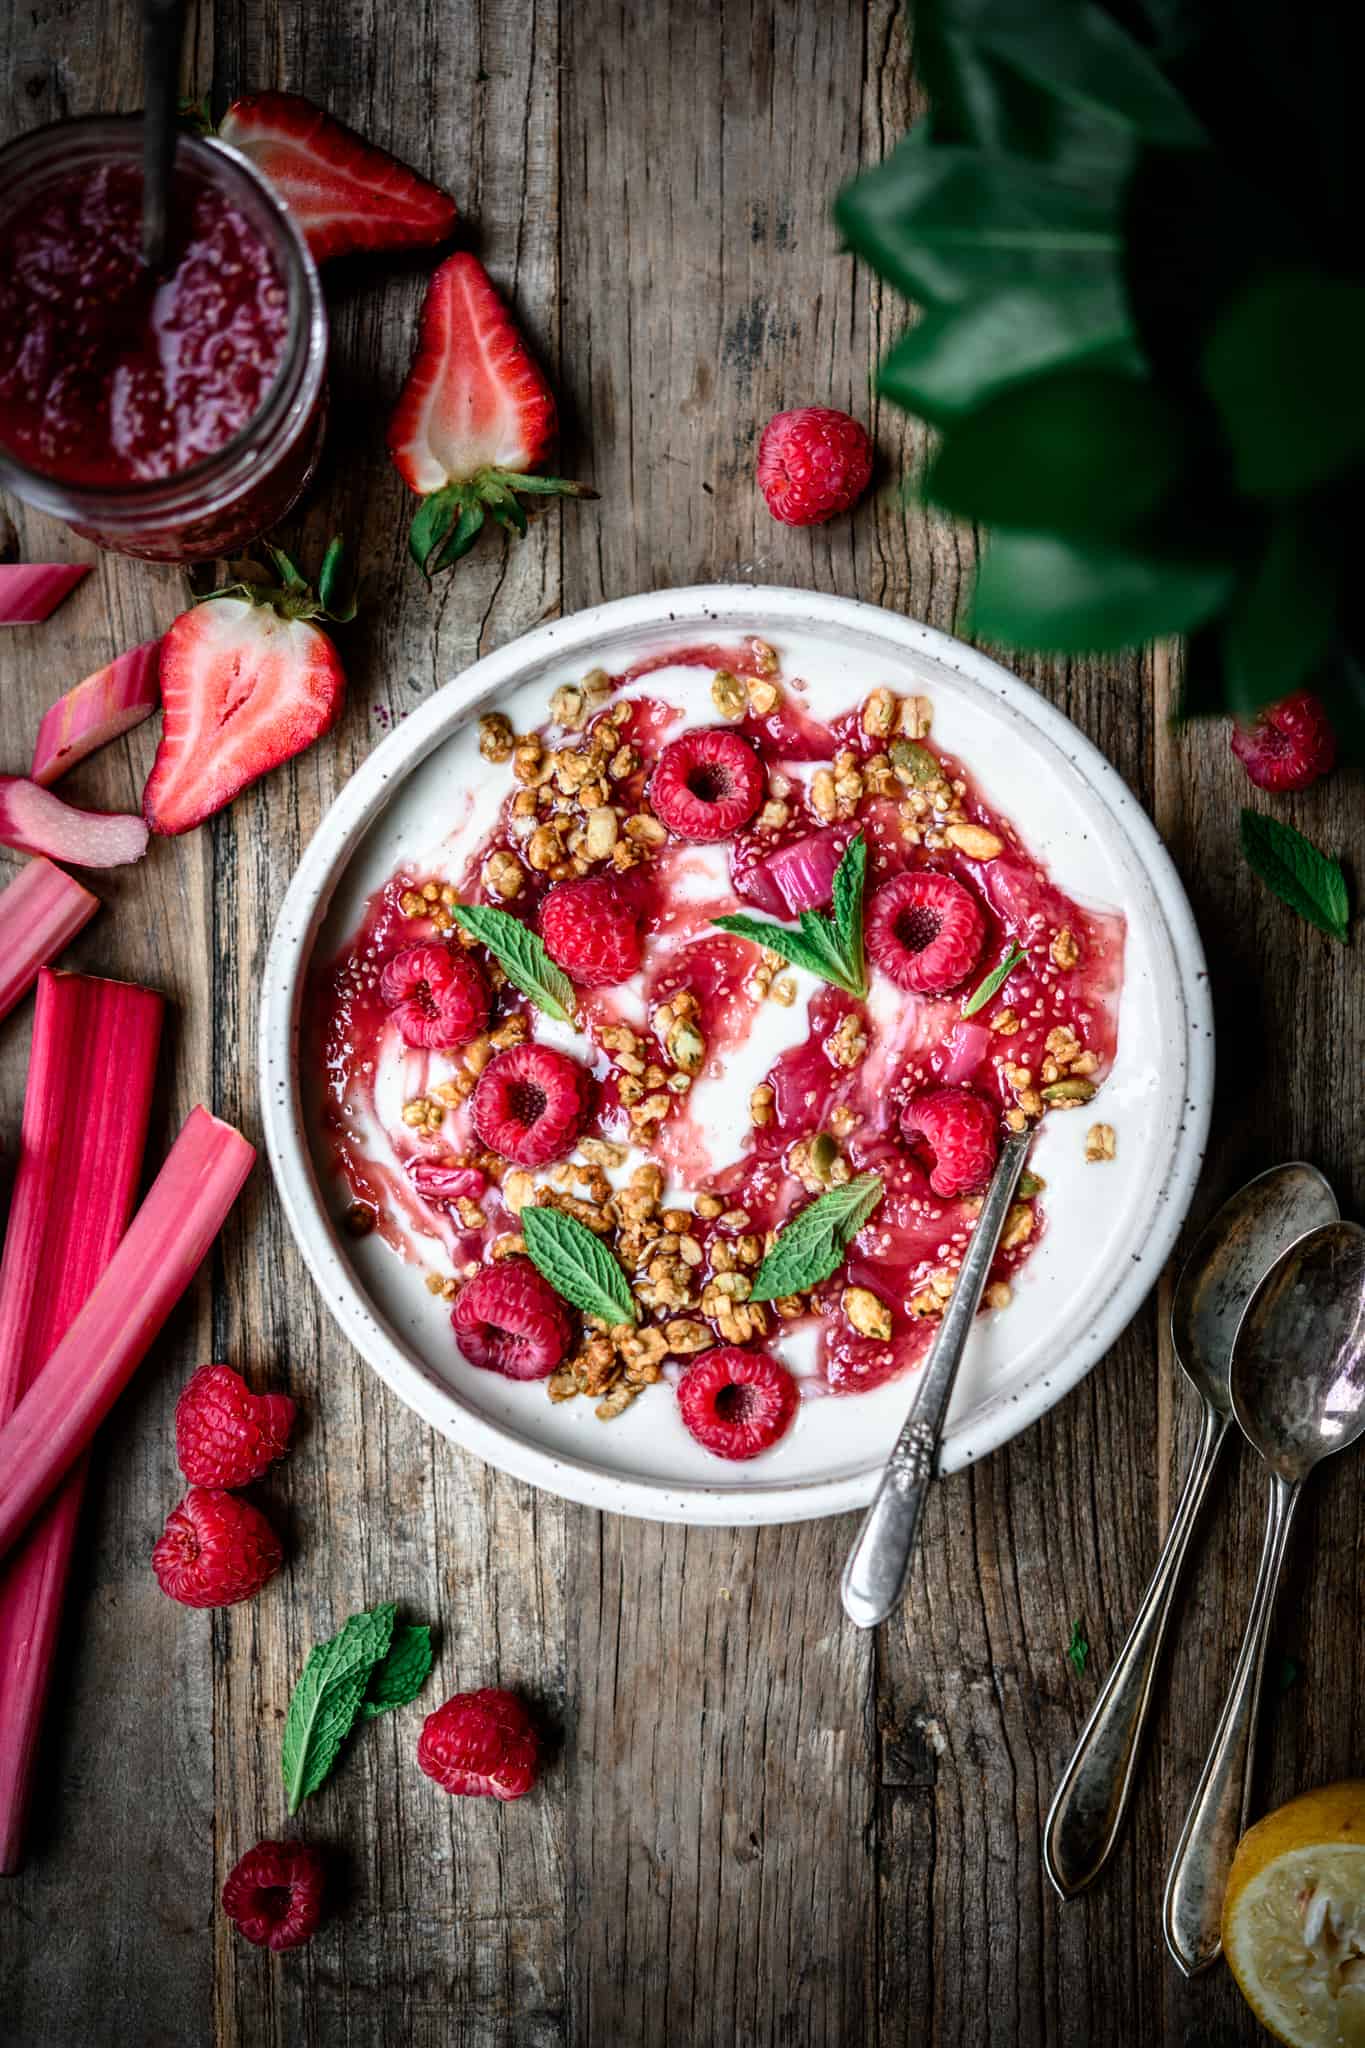 Overhead view of bowl of yogurt with rhubarb compote swirl, granola, raspberries and mint on wood table